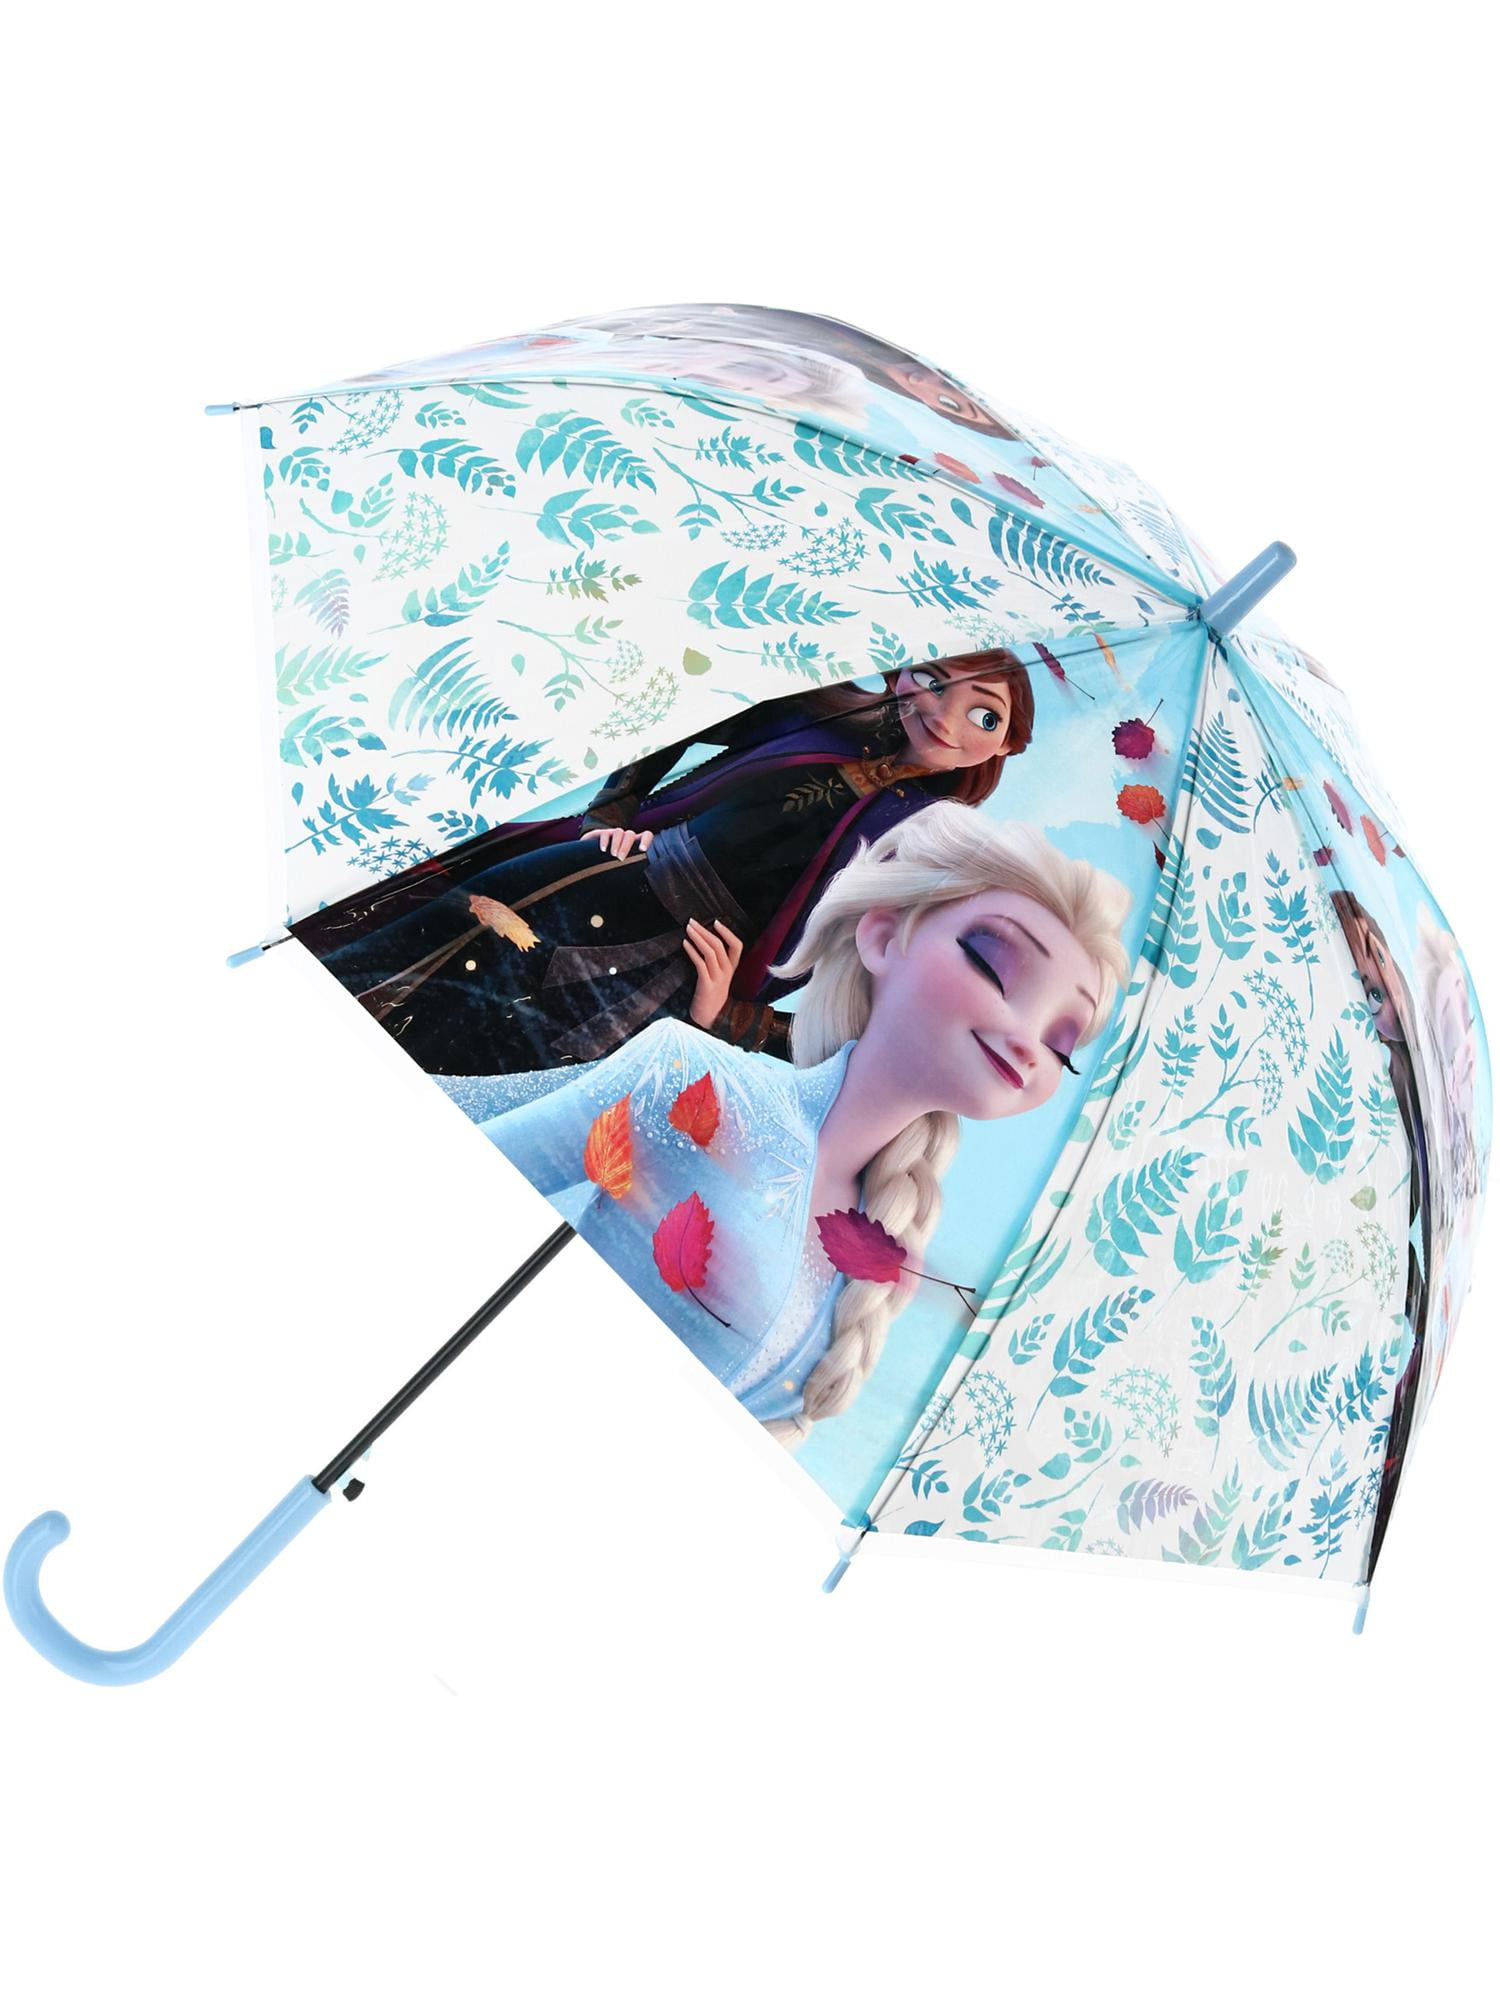 Details about   New Disney Frozen Character Folding Umbrella Anna Elsa Olaf 55cm from Japan 